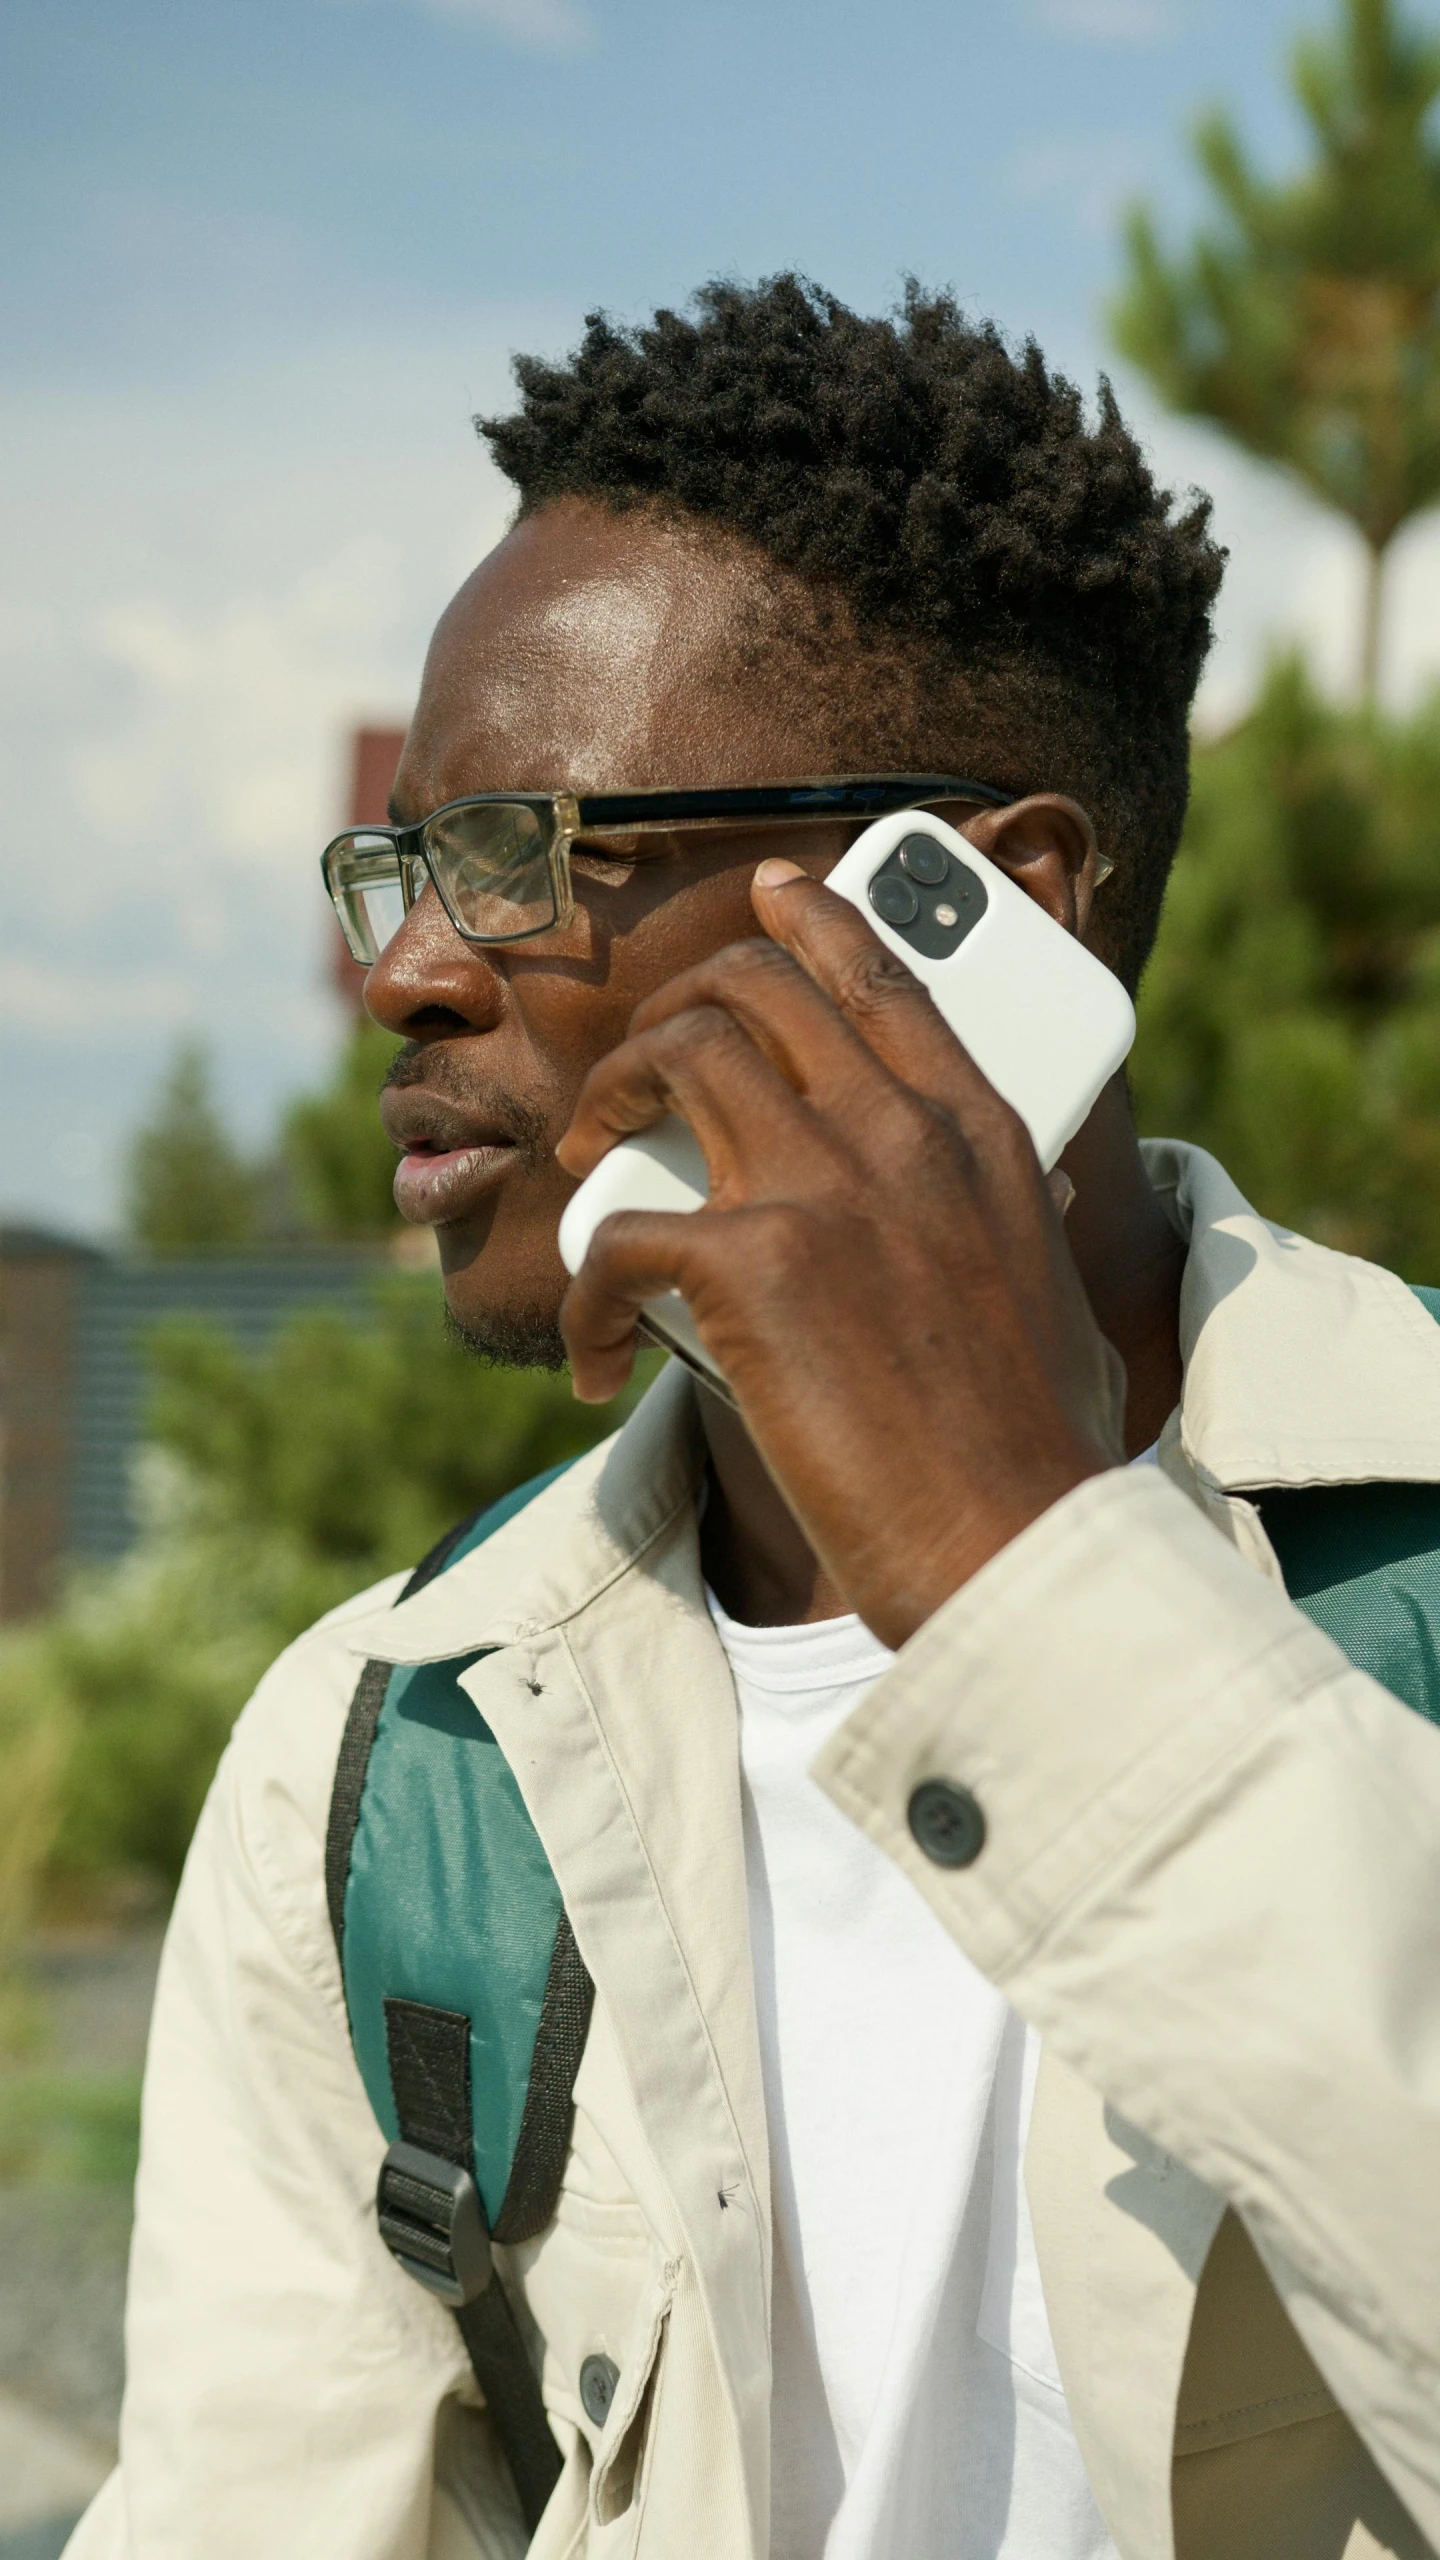 a man wearing glasses using a cell phone while he has earpieces